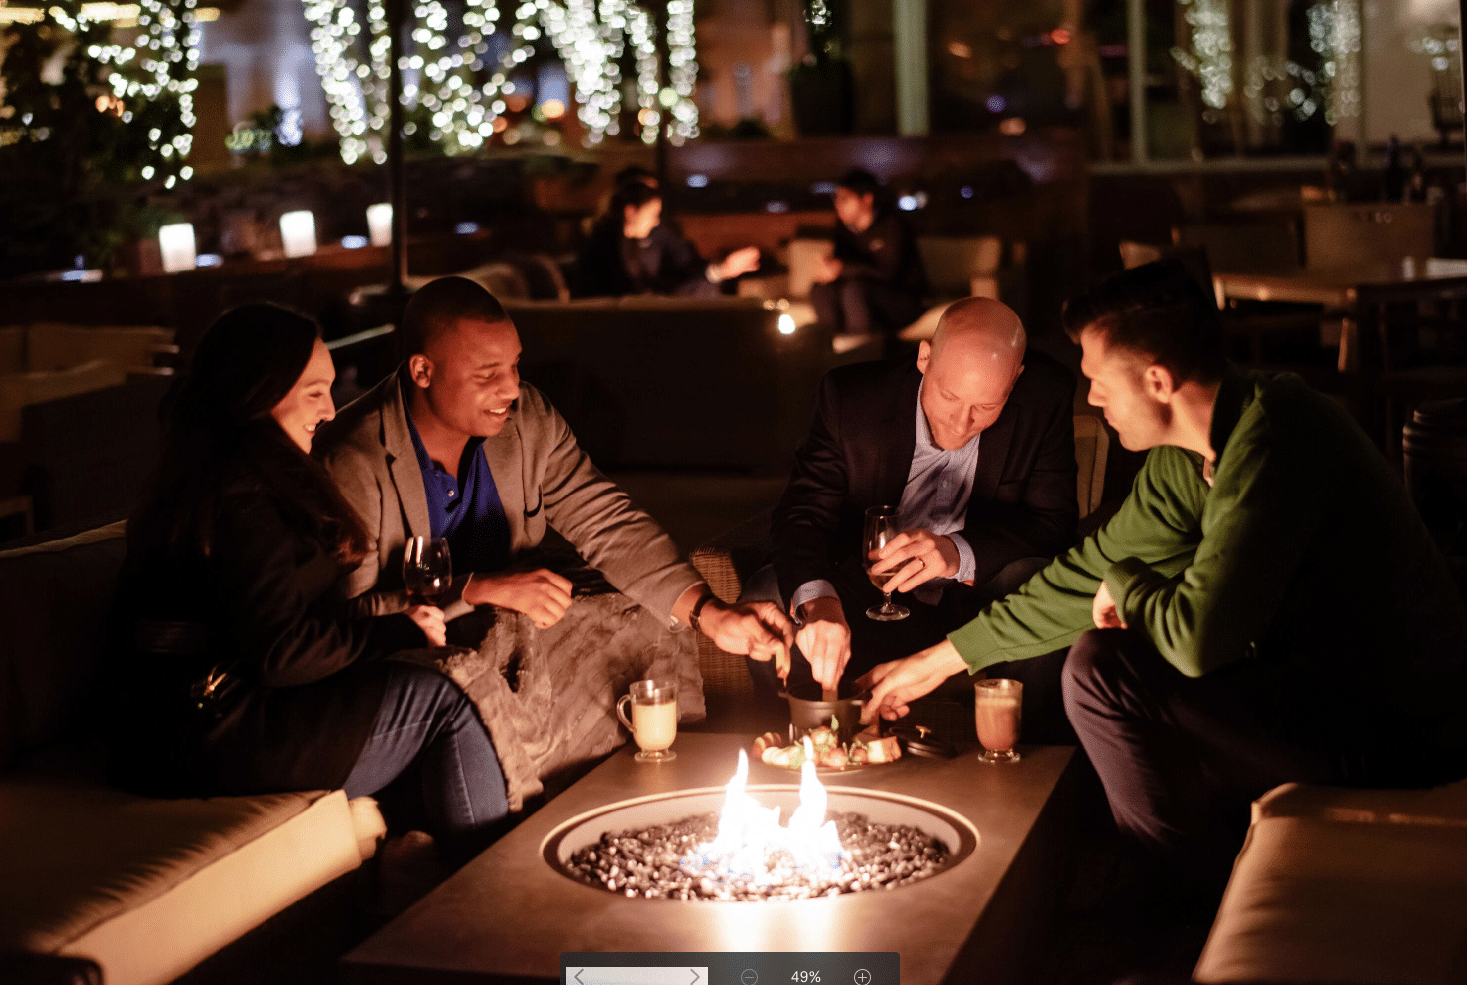 The new outdoor space, with fountain, is a sunken garden with fire pits and comes with blankets for guests to stay warm, and fondue to make it winter-cozy. (Courtesy Blue Duck Tavern)